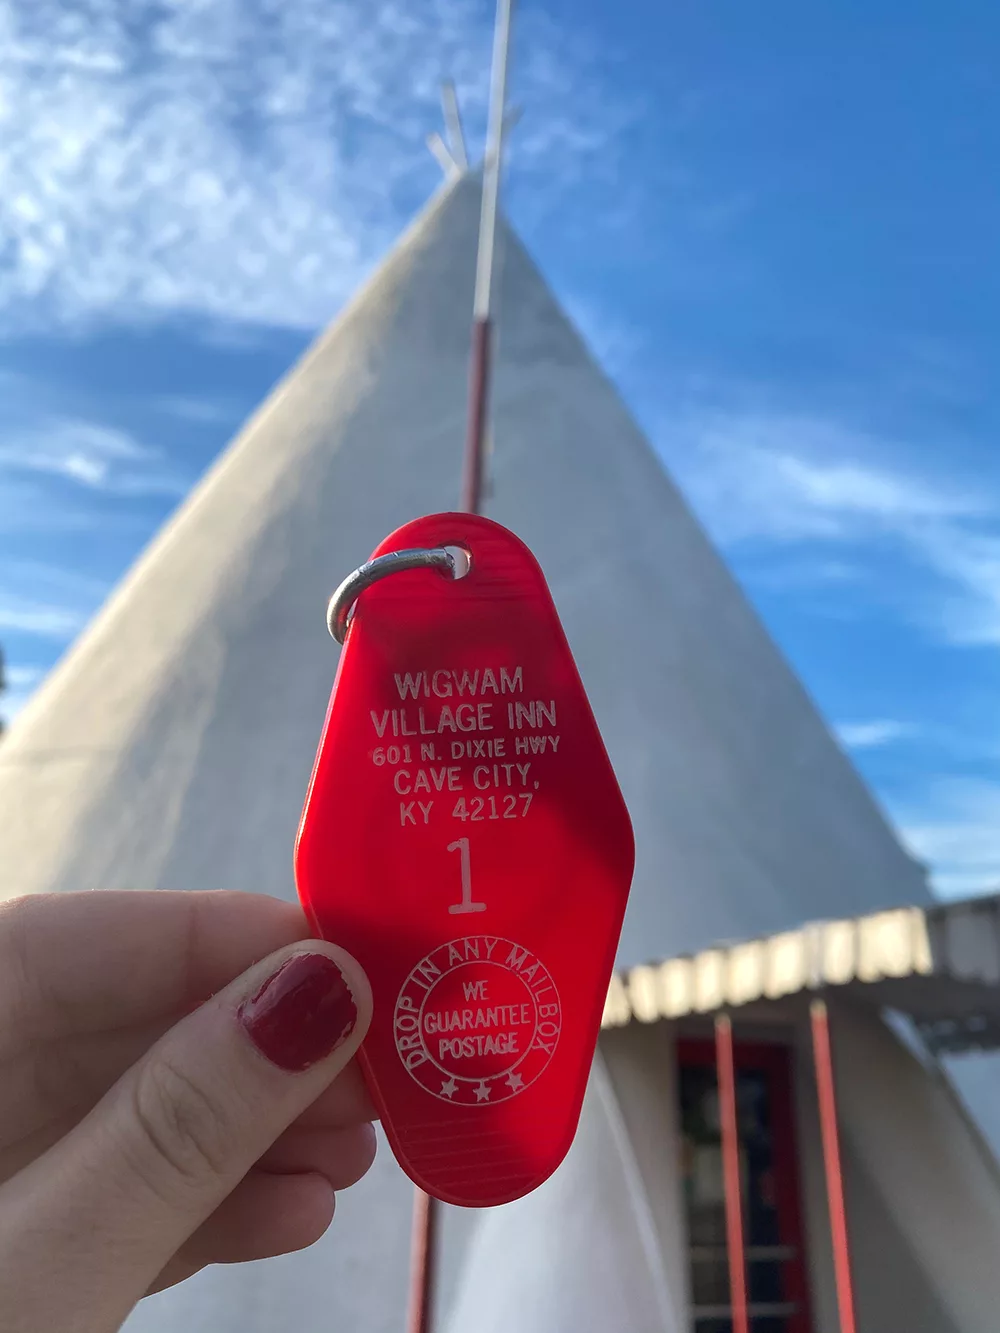 Red hotel key tag from the Wigwam Village Inn #2 in front of large concrete teepee in Cave City, Kentucky